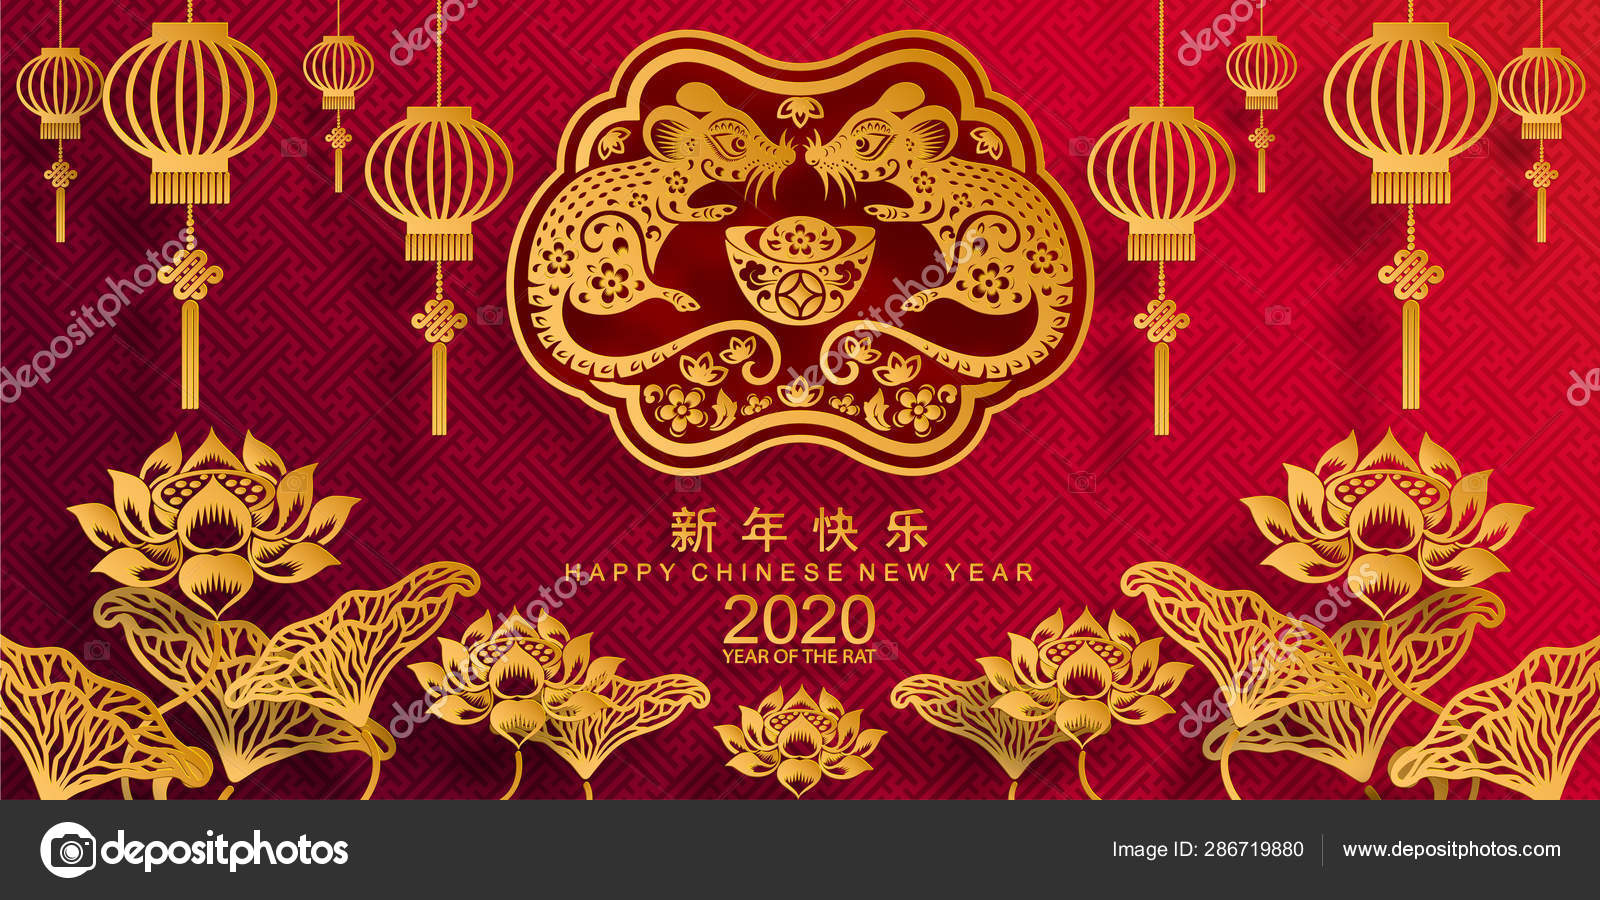 Leowefowa 15x8ft Happy Chinese New Year 2020 Year of The Rat Backdrop for Photography Vinyl Chinese Style Golden Mouse Paper-Cut Red Peony Flowers Red Background New Year Party Decor Studio Props 